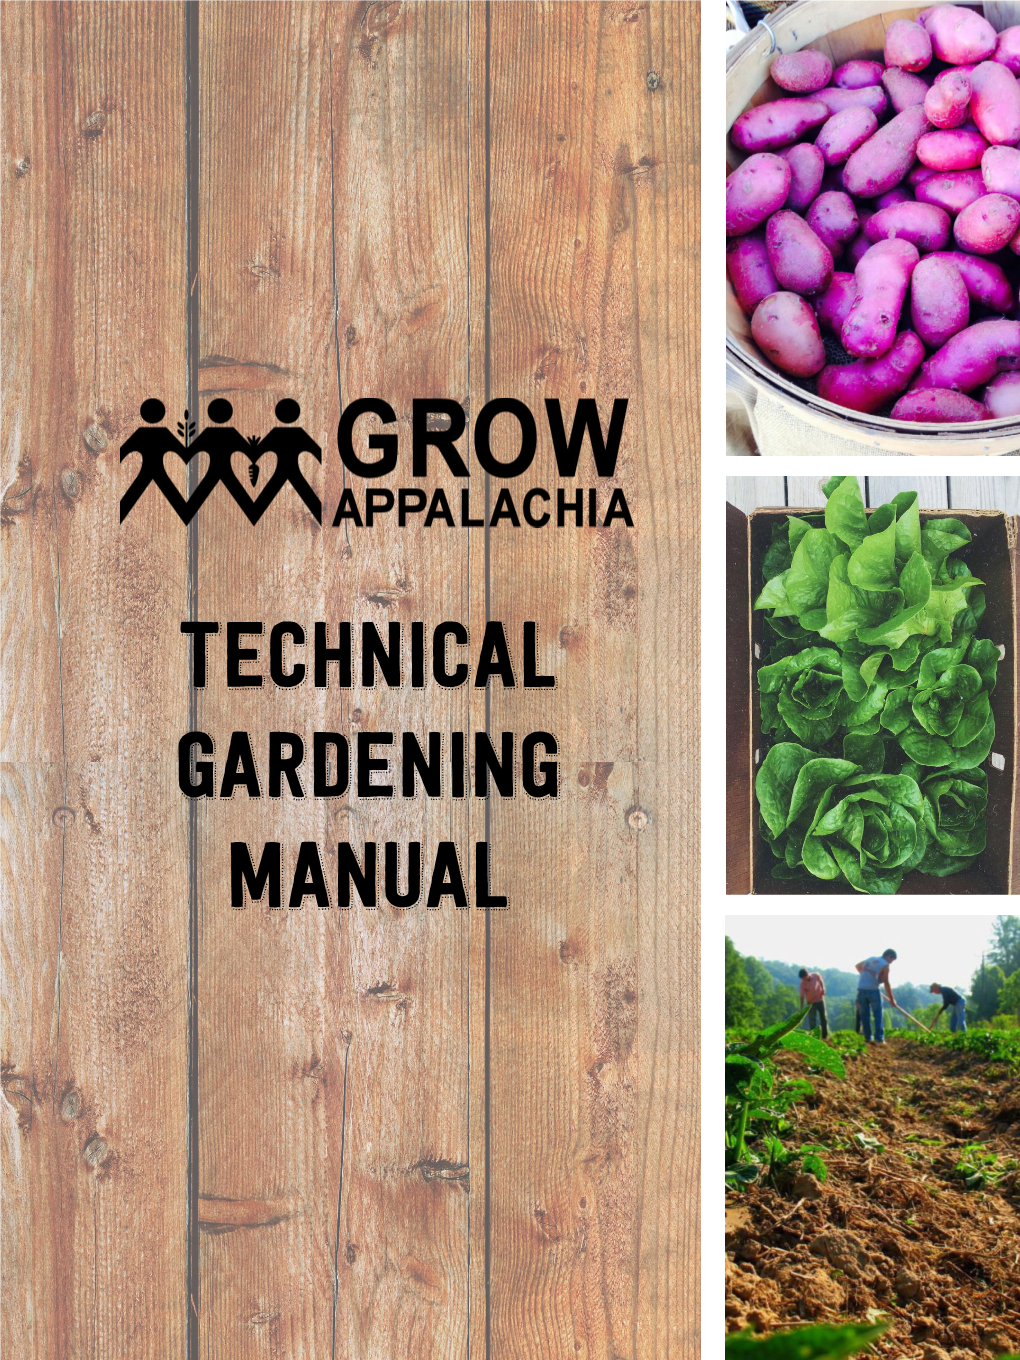 Technical Gardening Manual Planting the Seeds for a Sustainable Future